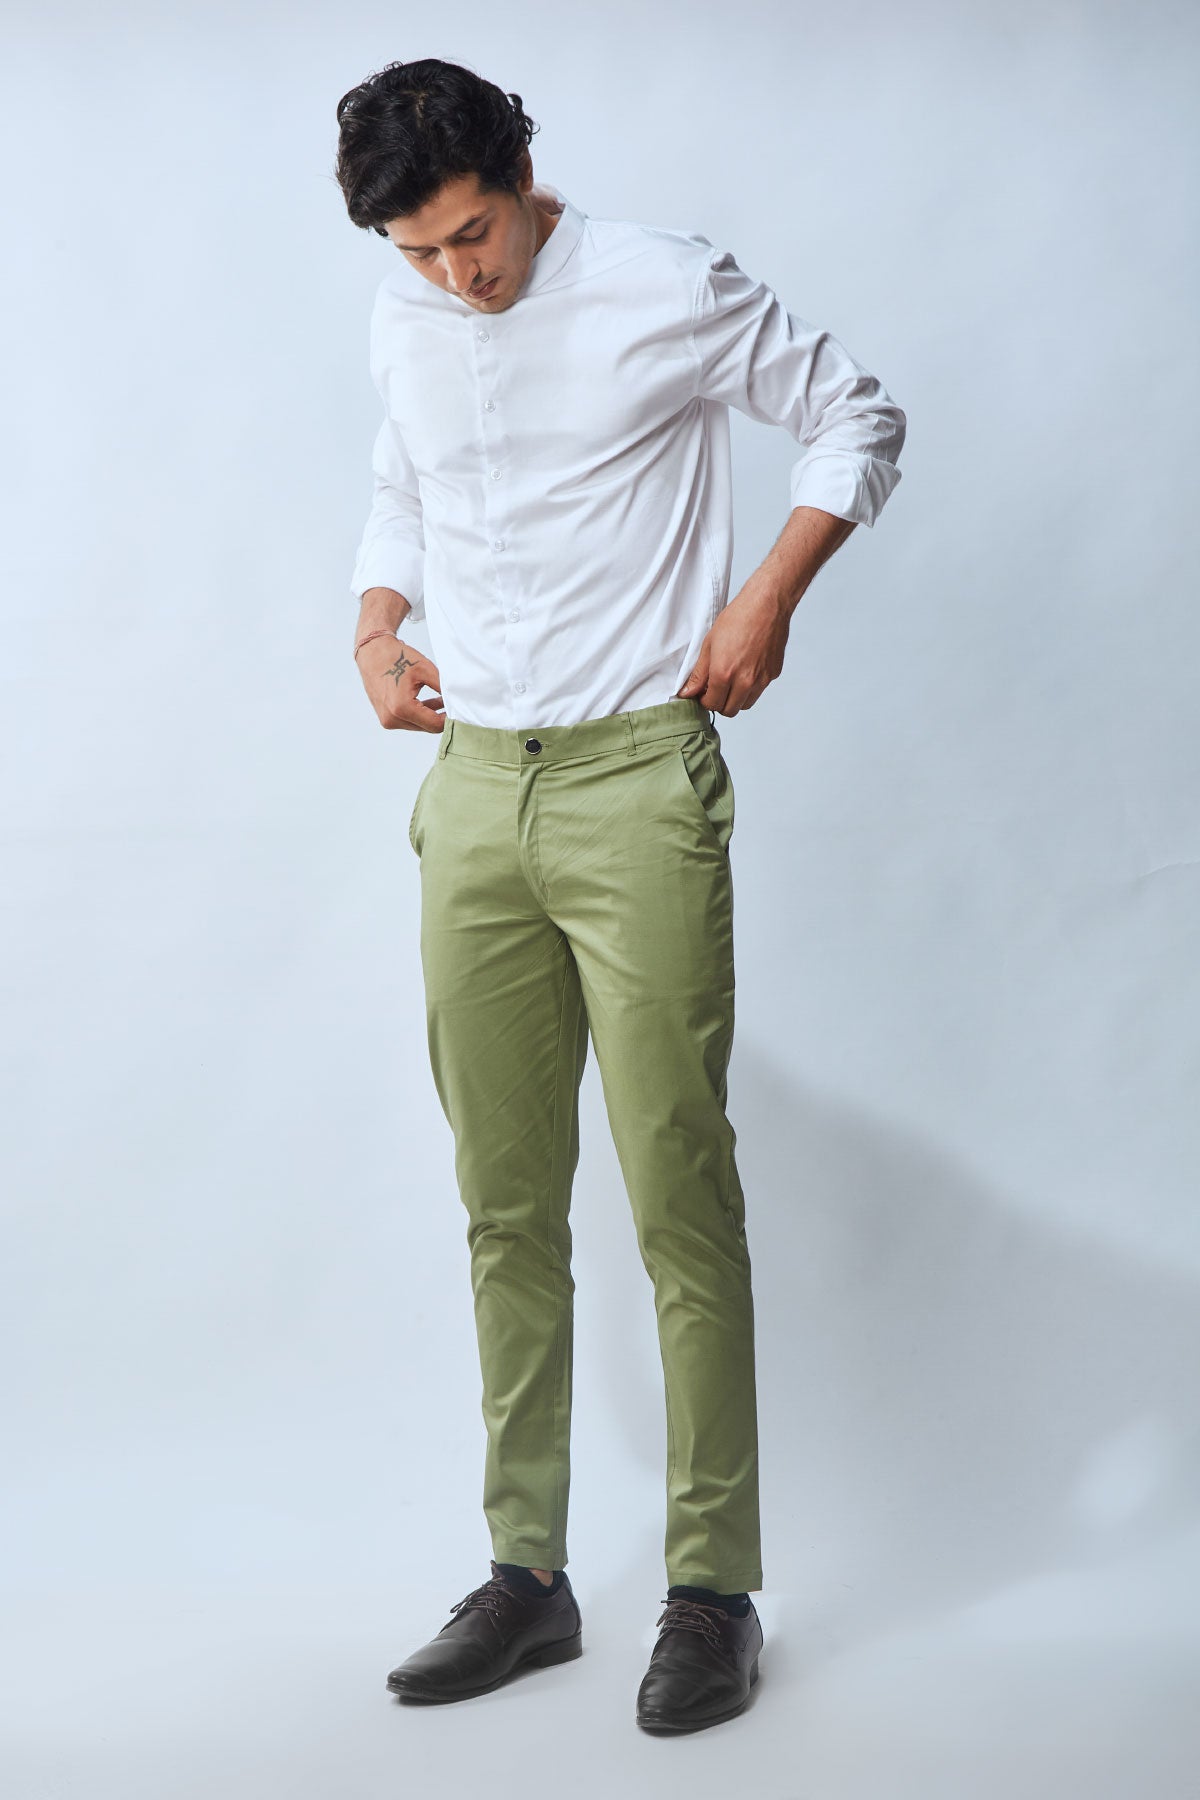 Buy Pista Green Trousers & Pants for Men by The Indian Garage Co Online |  Ajio.com